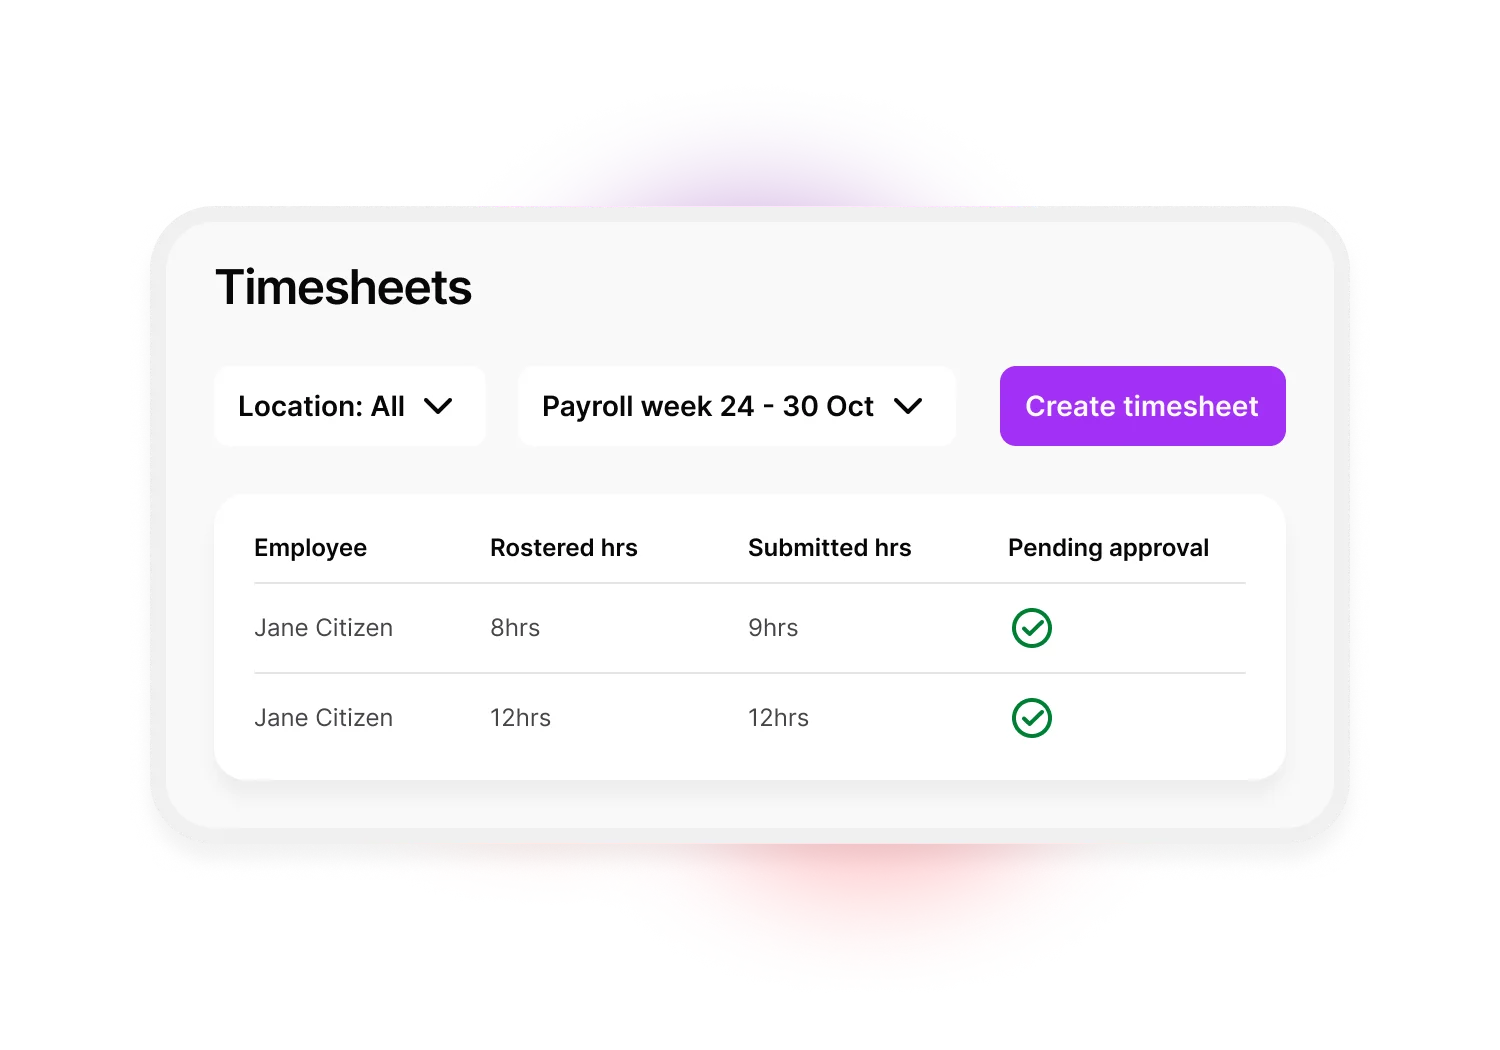 A simple view of the timesheets screen. There are two dropdown options along the top. These are location and payroll week. There's a large purple button for creating new timesheets and a list of timesheets that are pending approval.